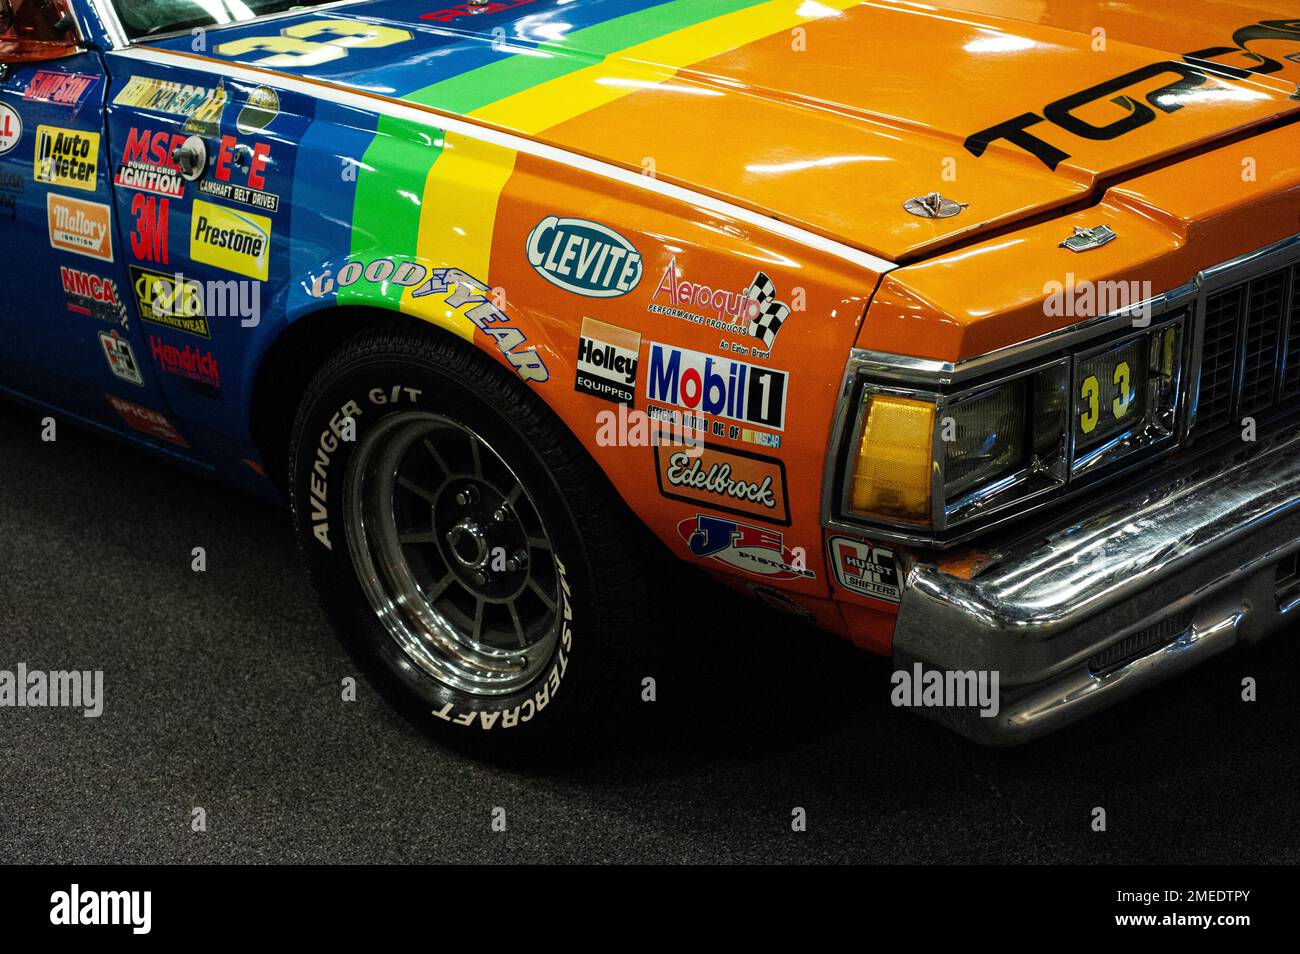 A Nascar Chevrolet Caprice during the MCM Car Show in Bogota, Colombia, the biggest auto show in latin america, on January 20, 2022. Photo by: Chepa Beltran/Long Visual Press Stock Photo